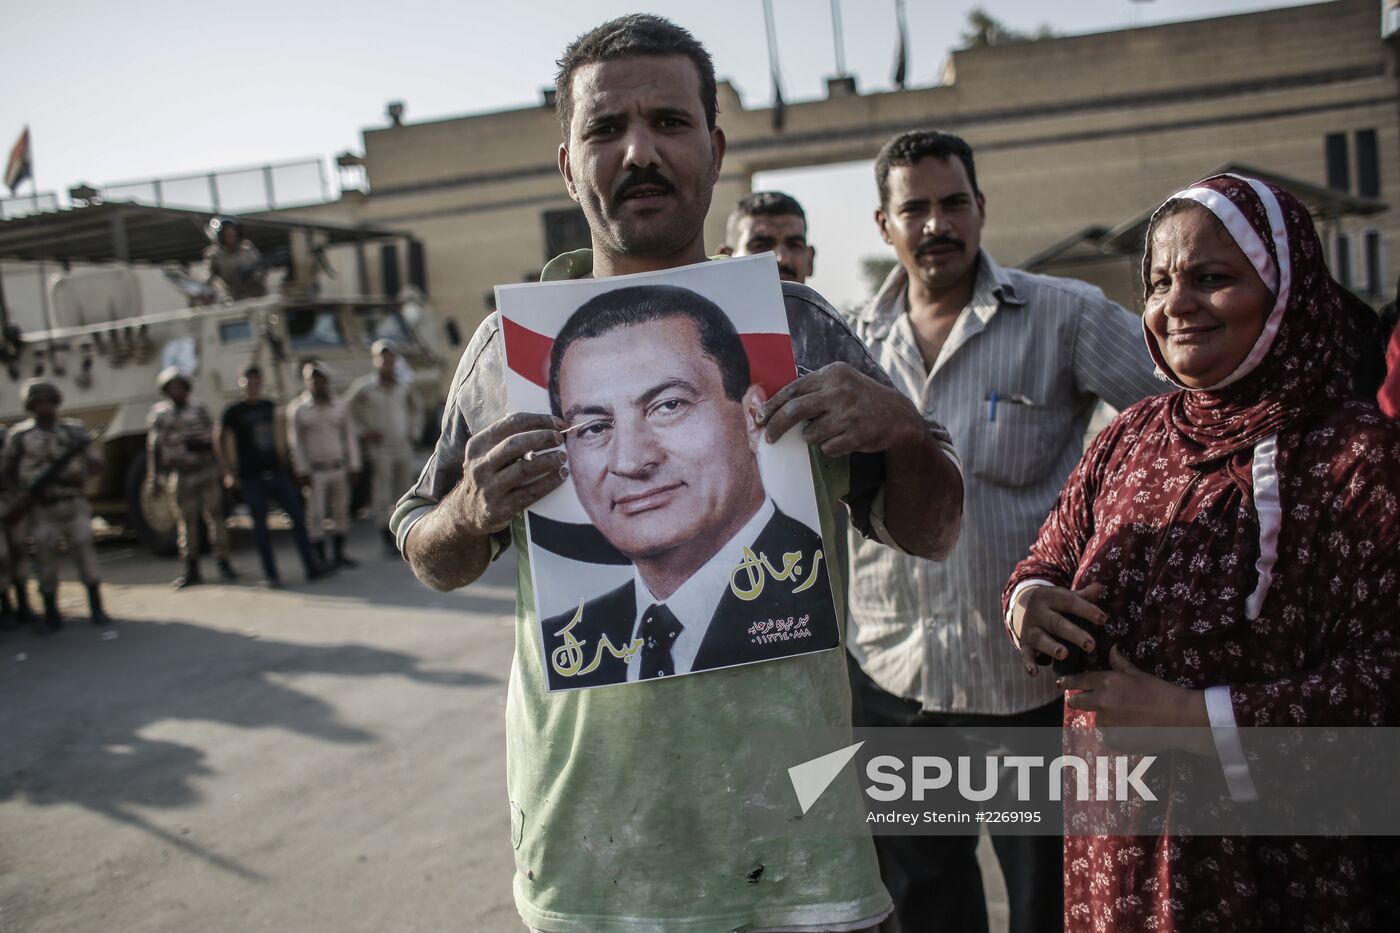 Egyptian ex-president's supporters celebrate his freedom